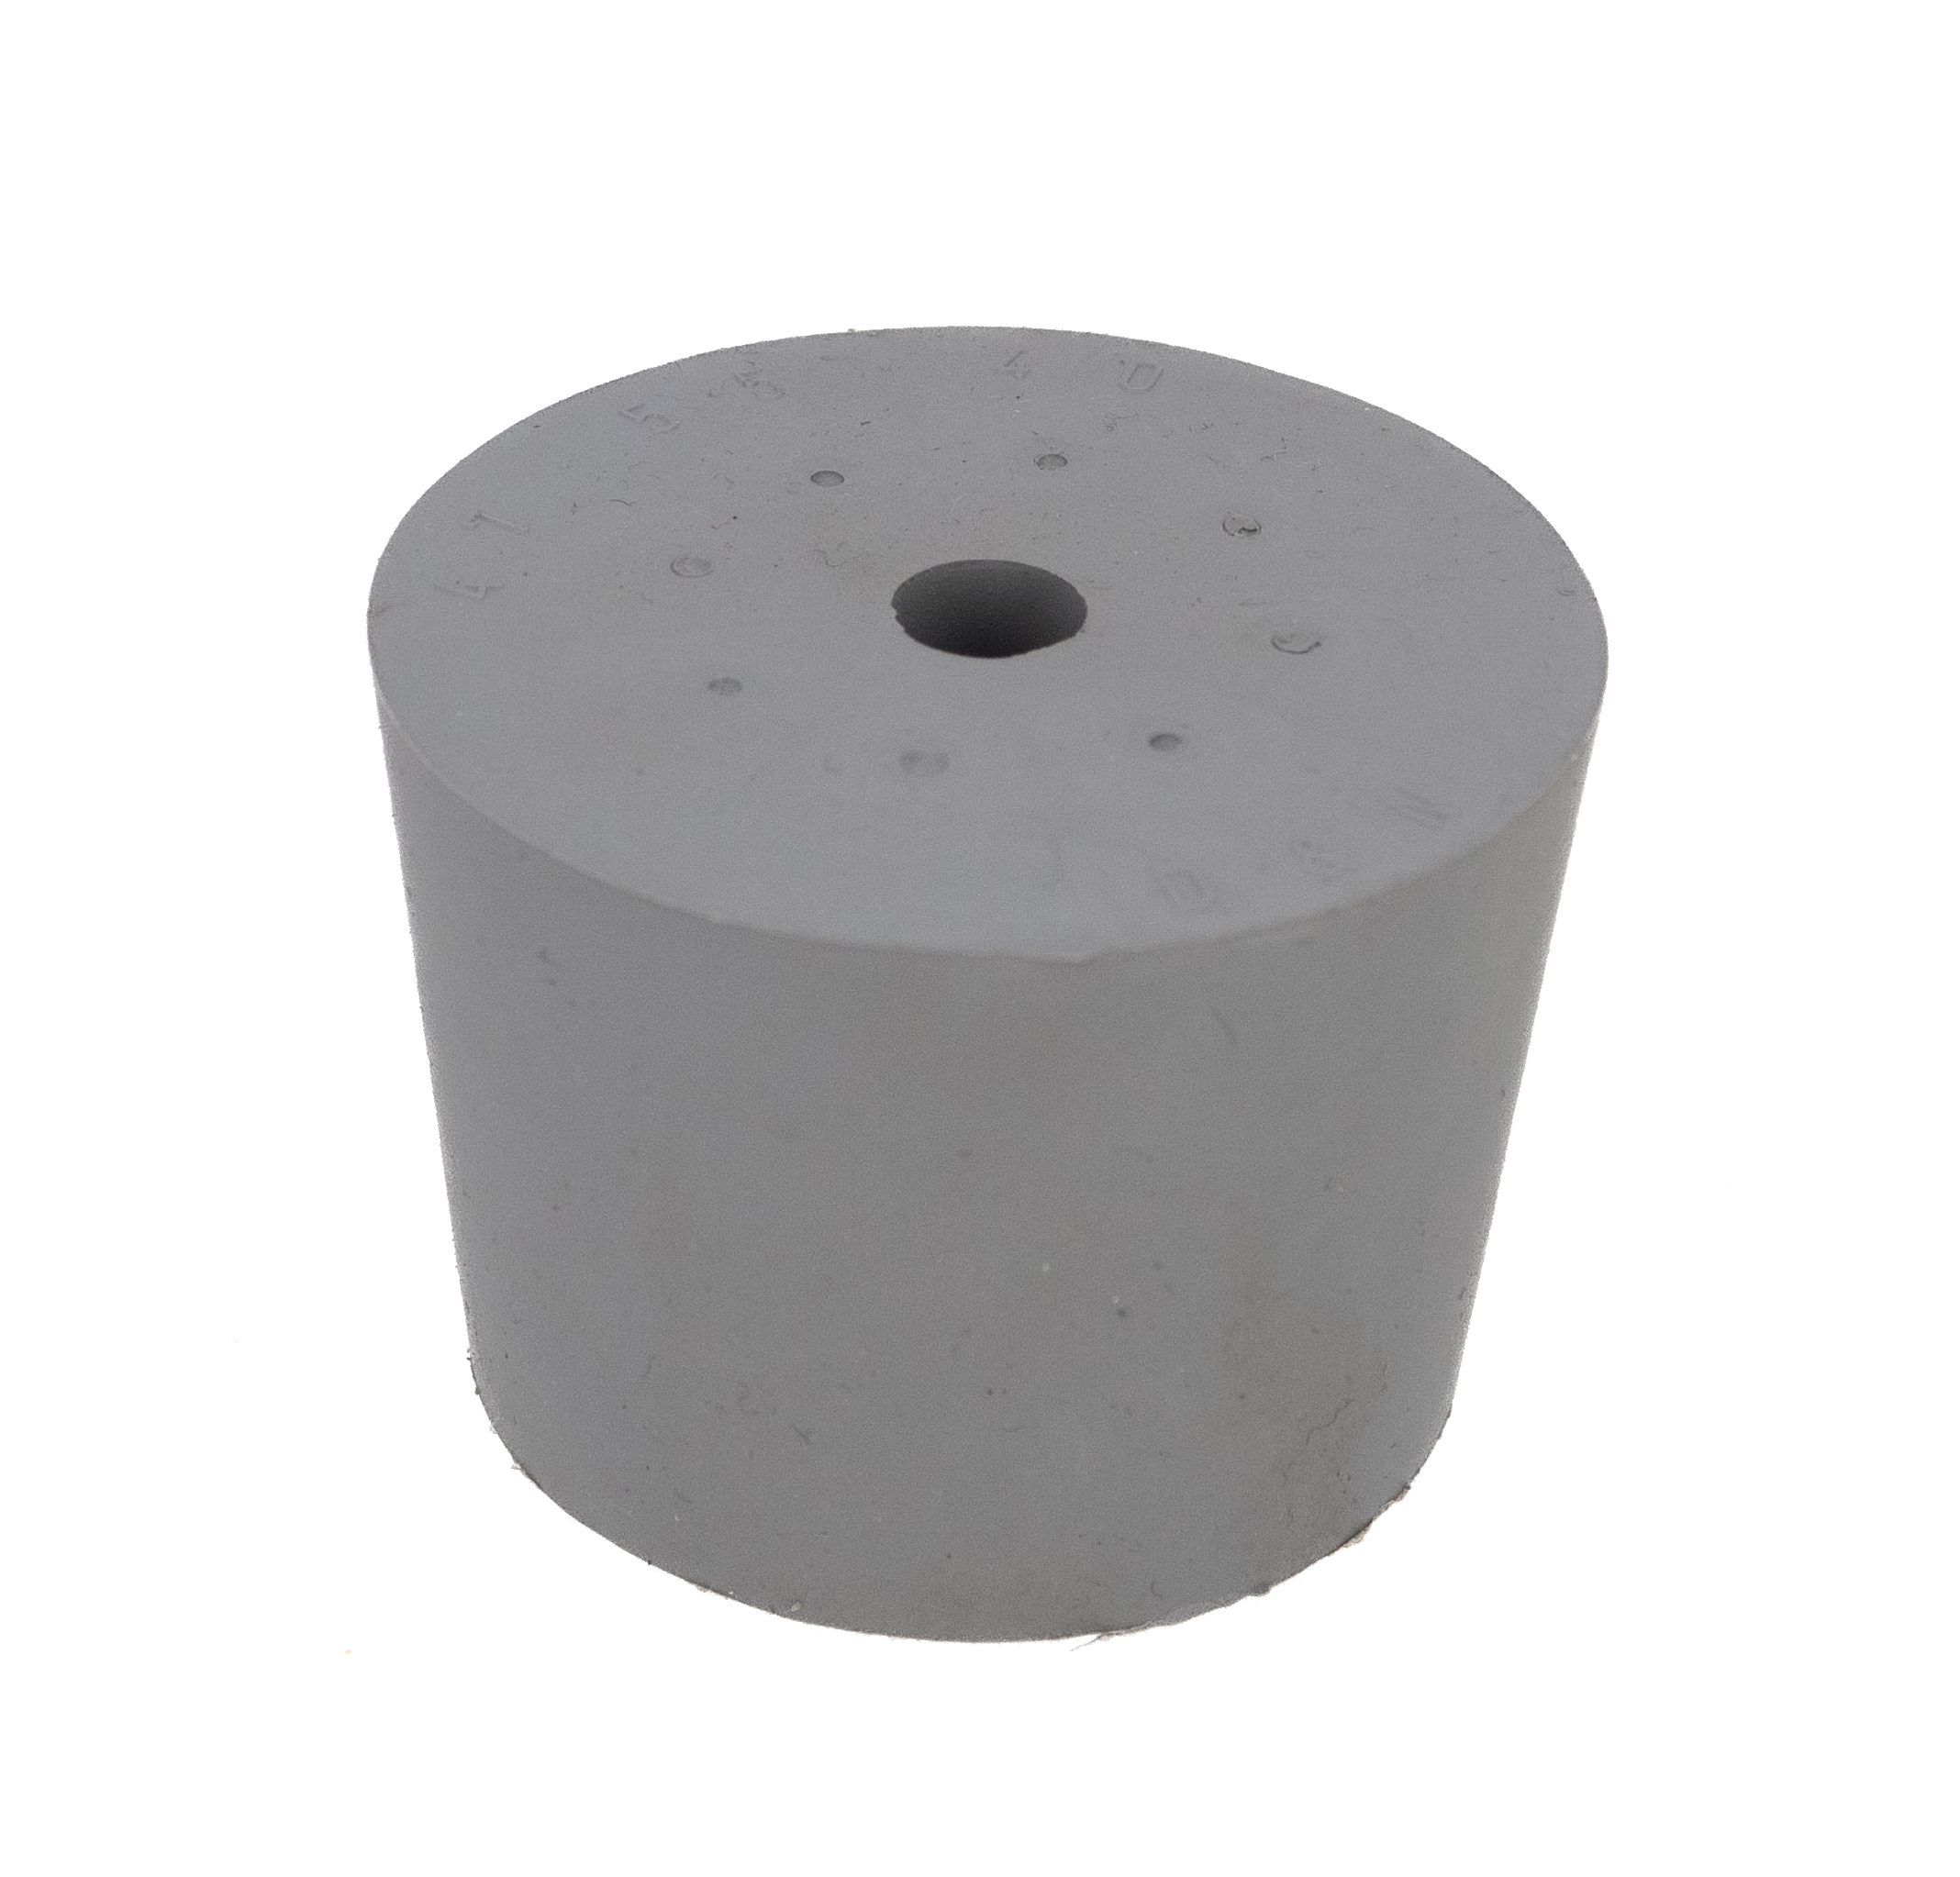 Rubber stopper grey 47 x 55 mm with hole 9 mm